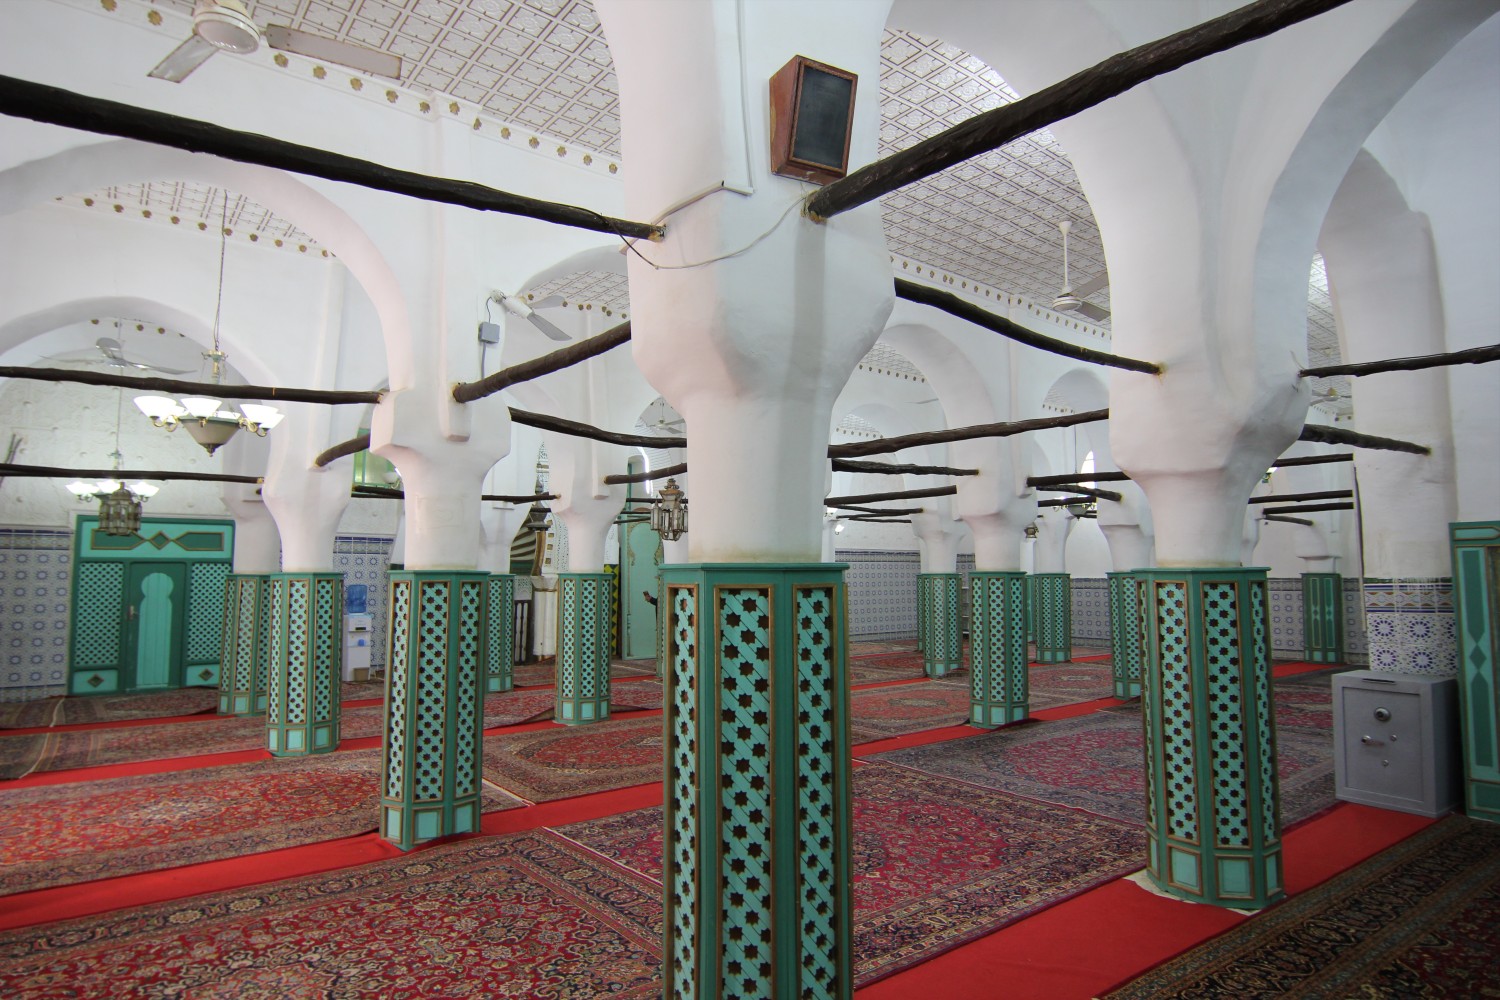 View of the prayer hall showing horseshoe arches maintained by wooden rods